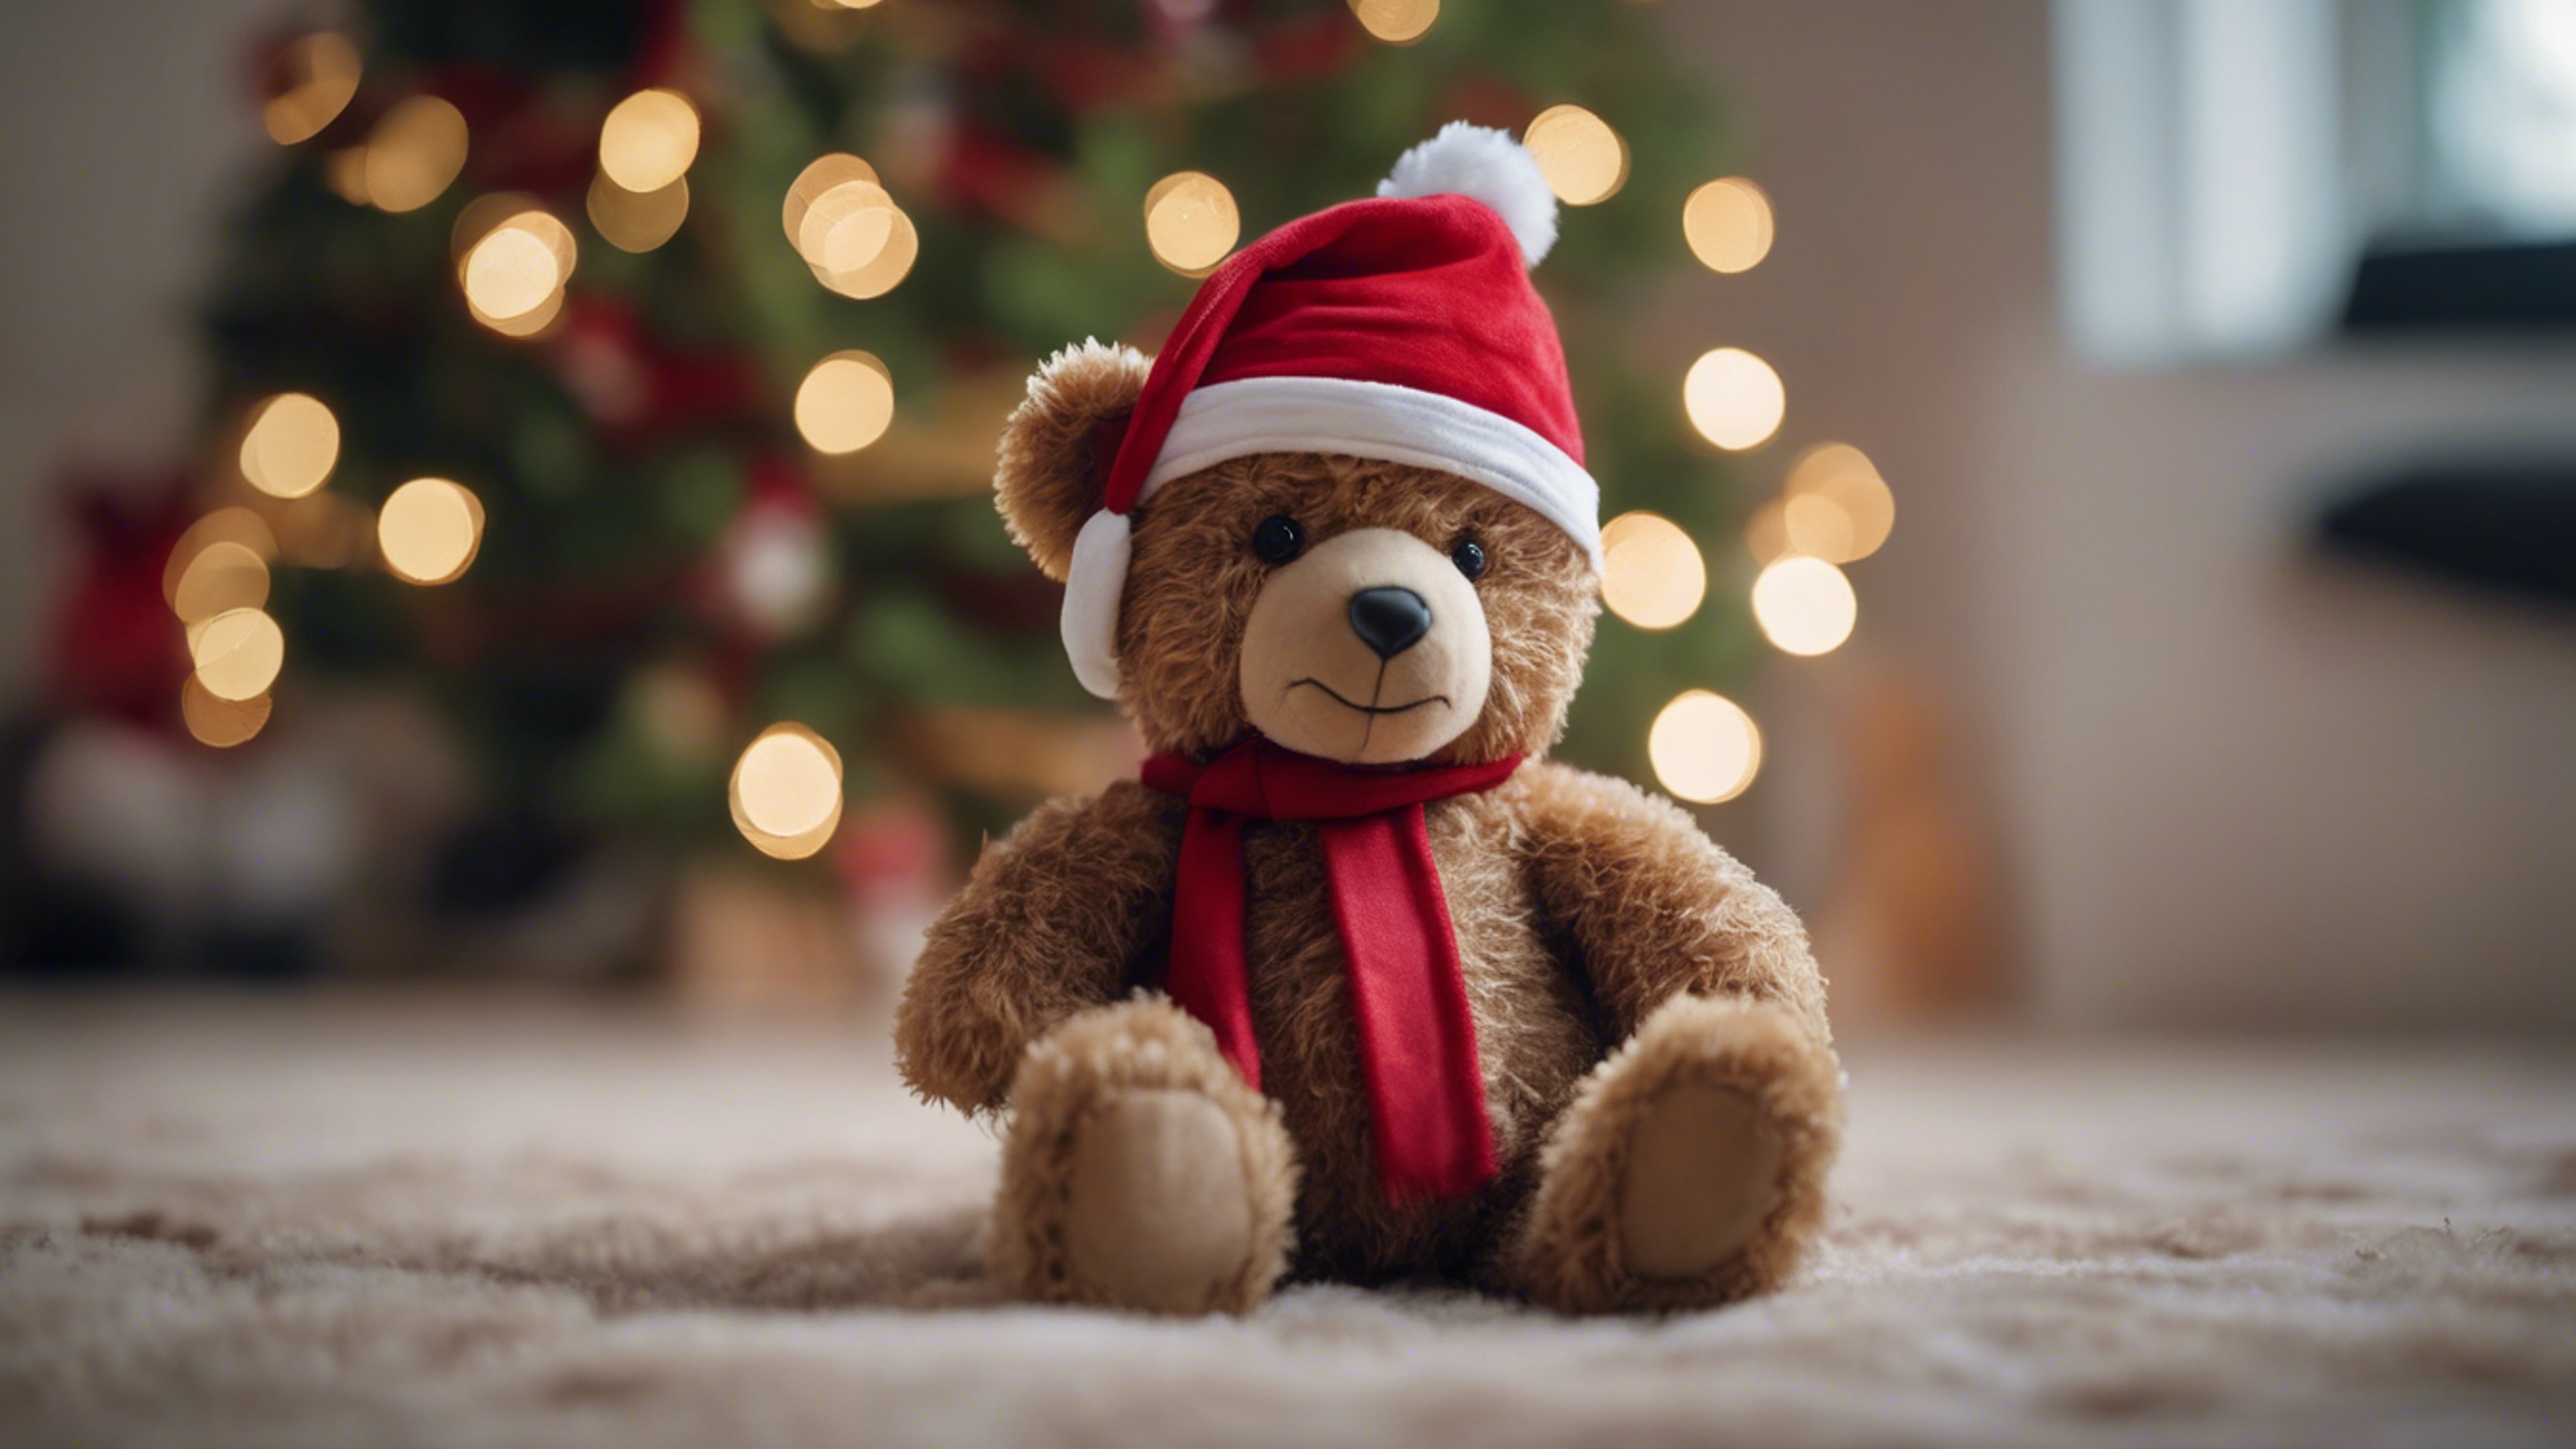 A teddy bear wearing a red Christmas hat, sitting next to a Christmas tree.壁紙[764052ee6d604b67a698]